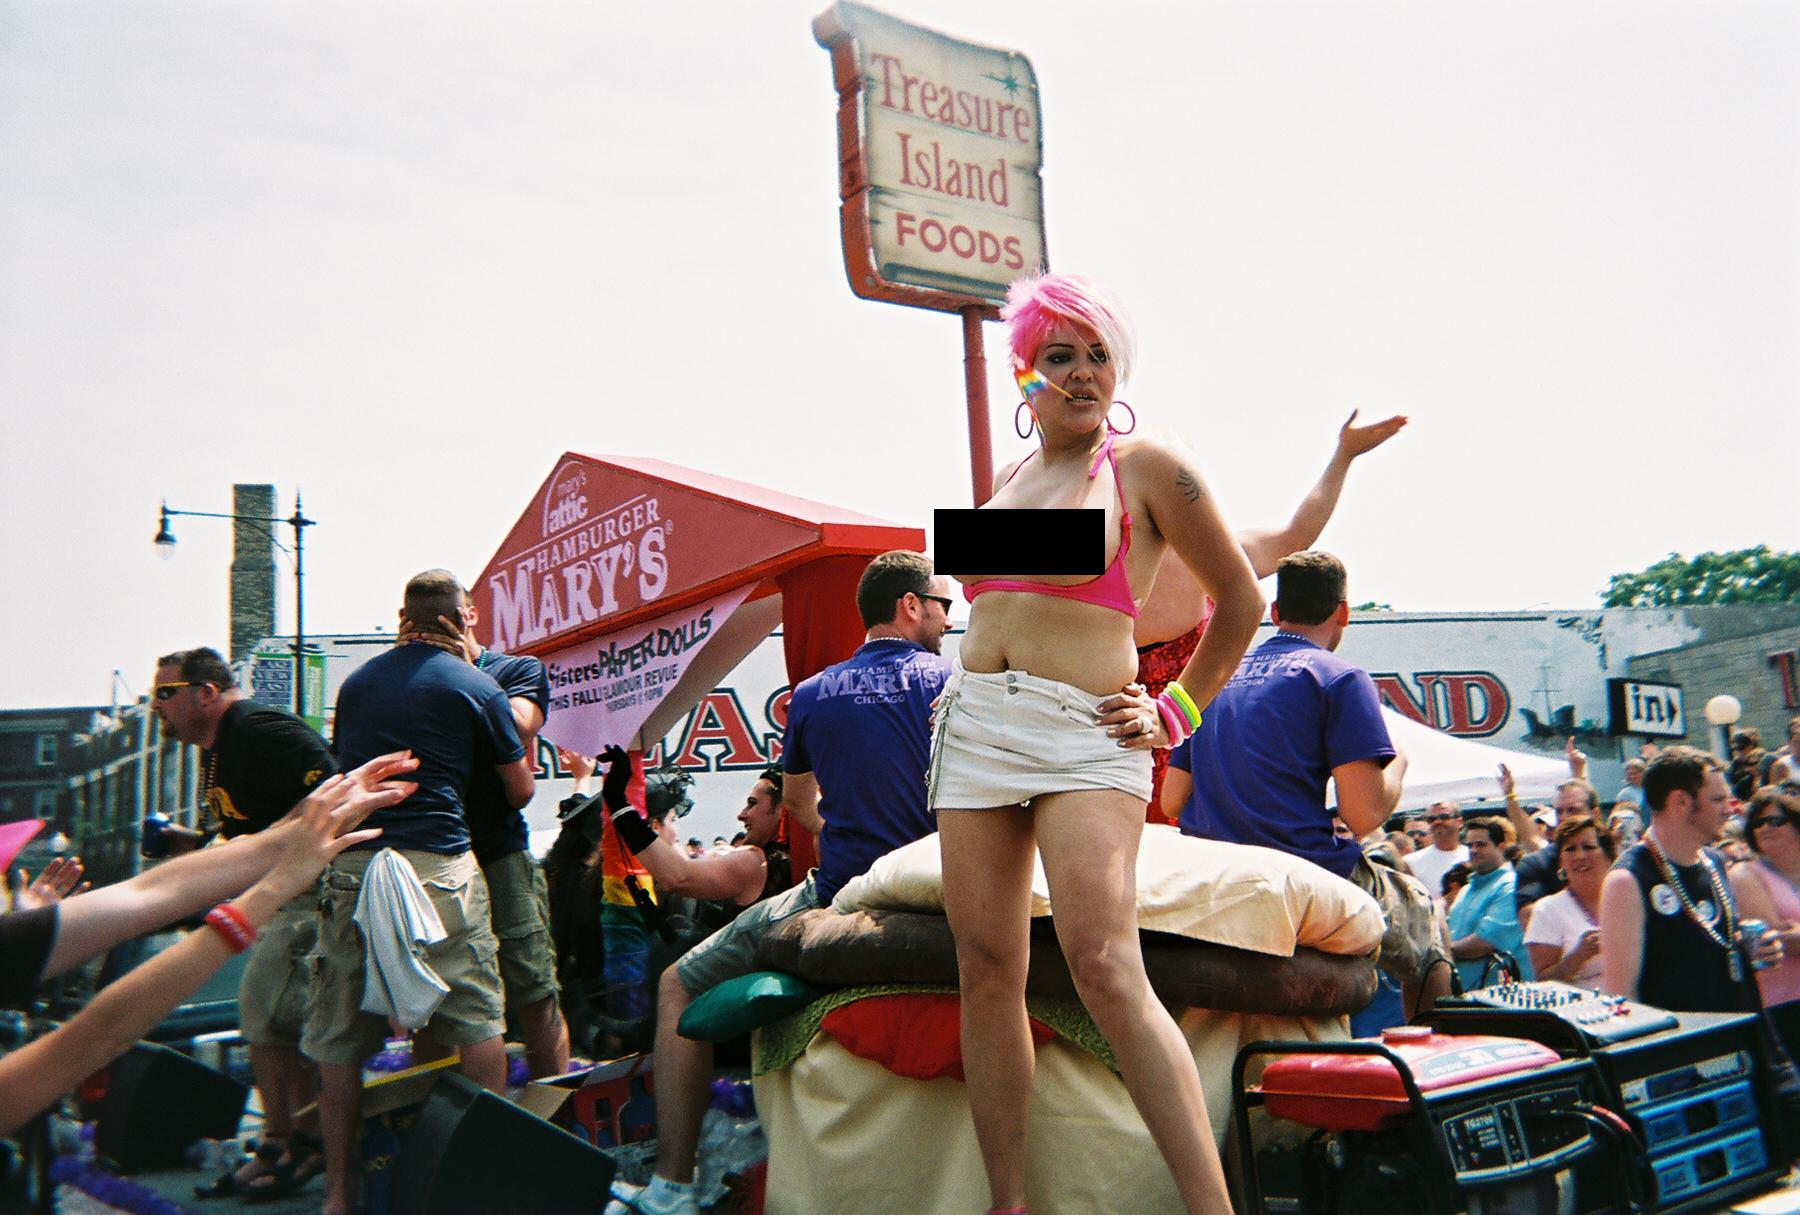 chicago_topless_transsexual_2007.JPG